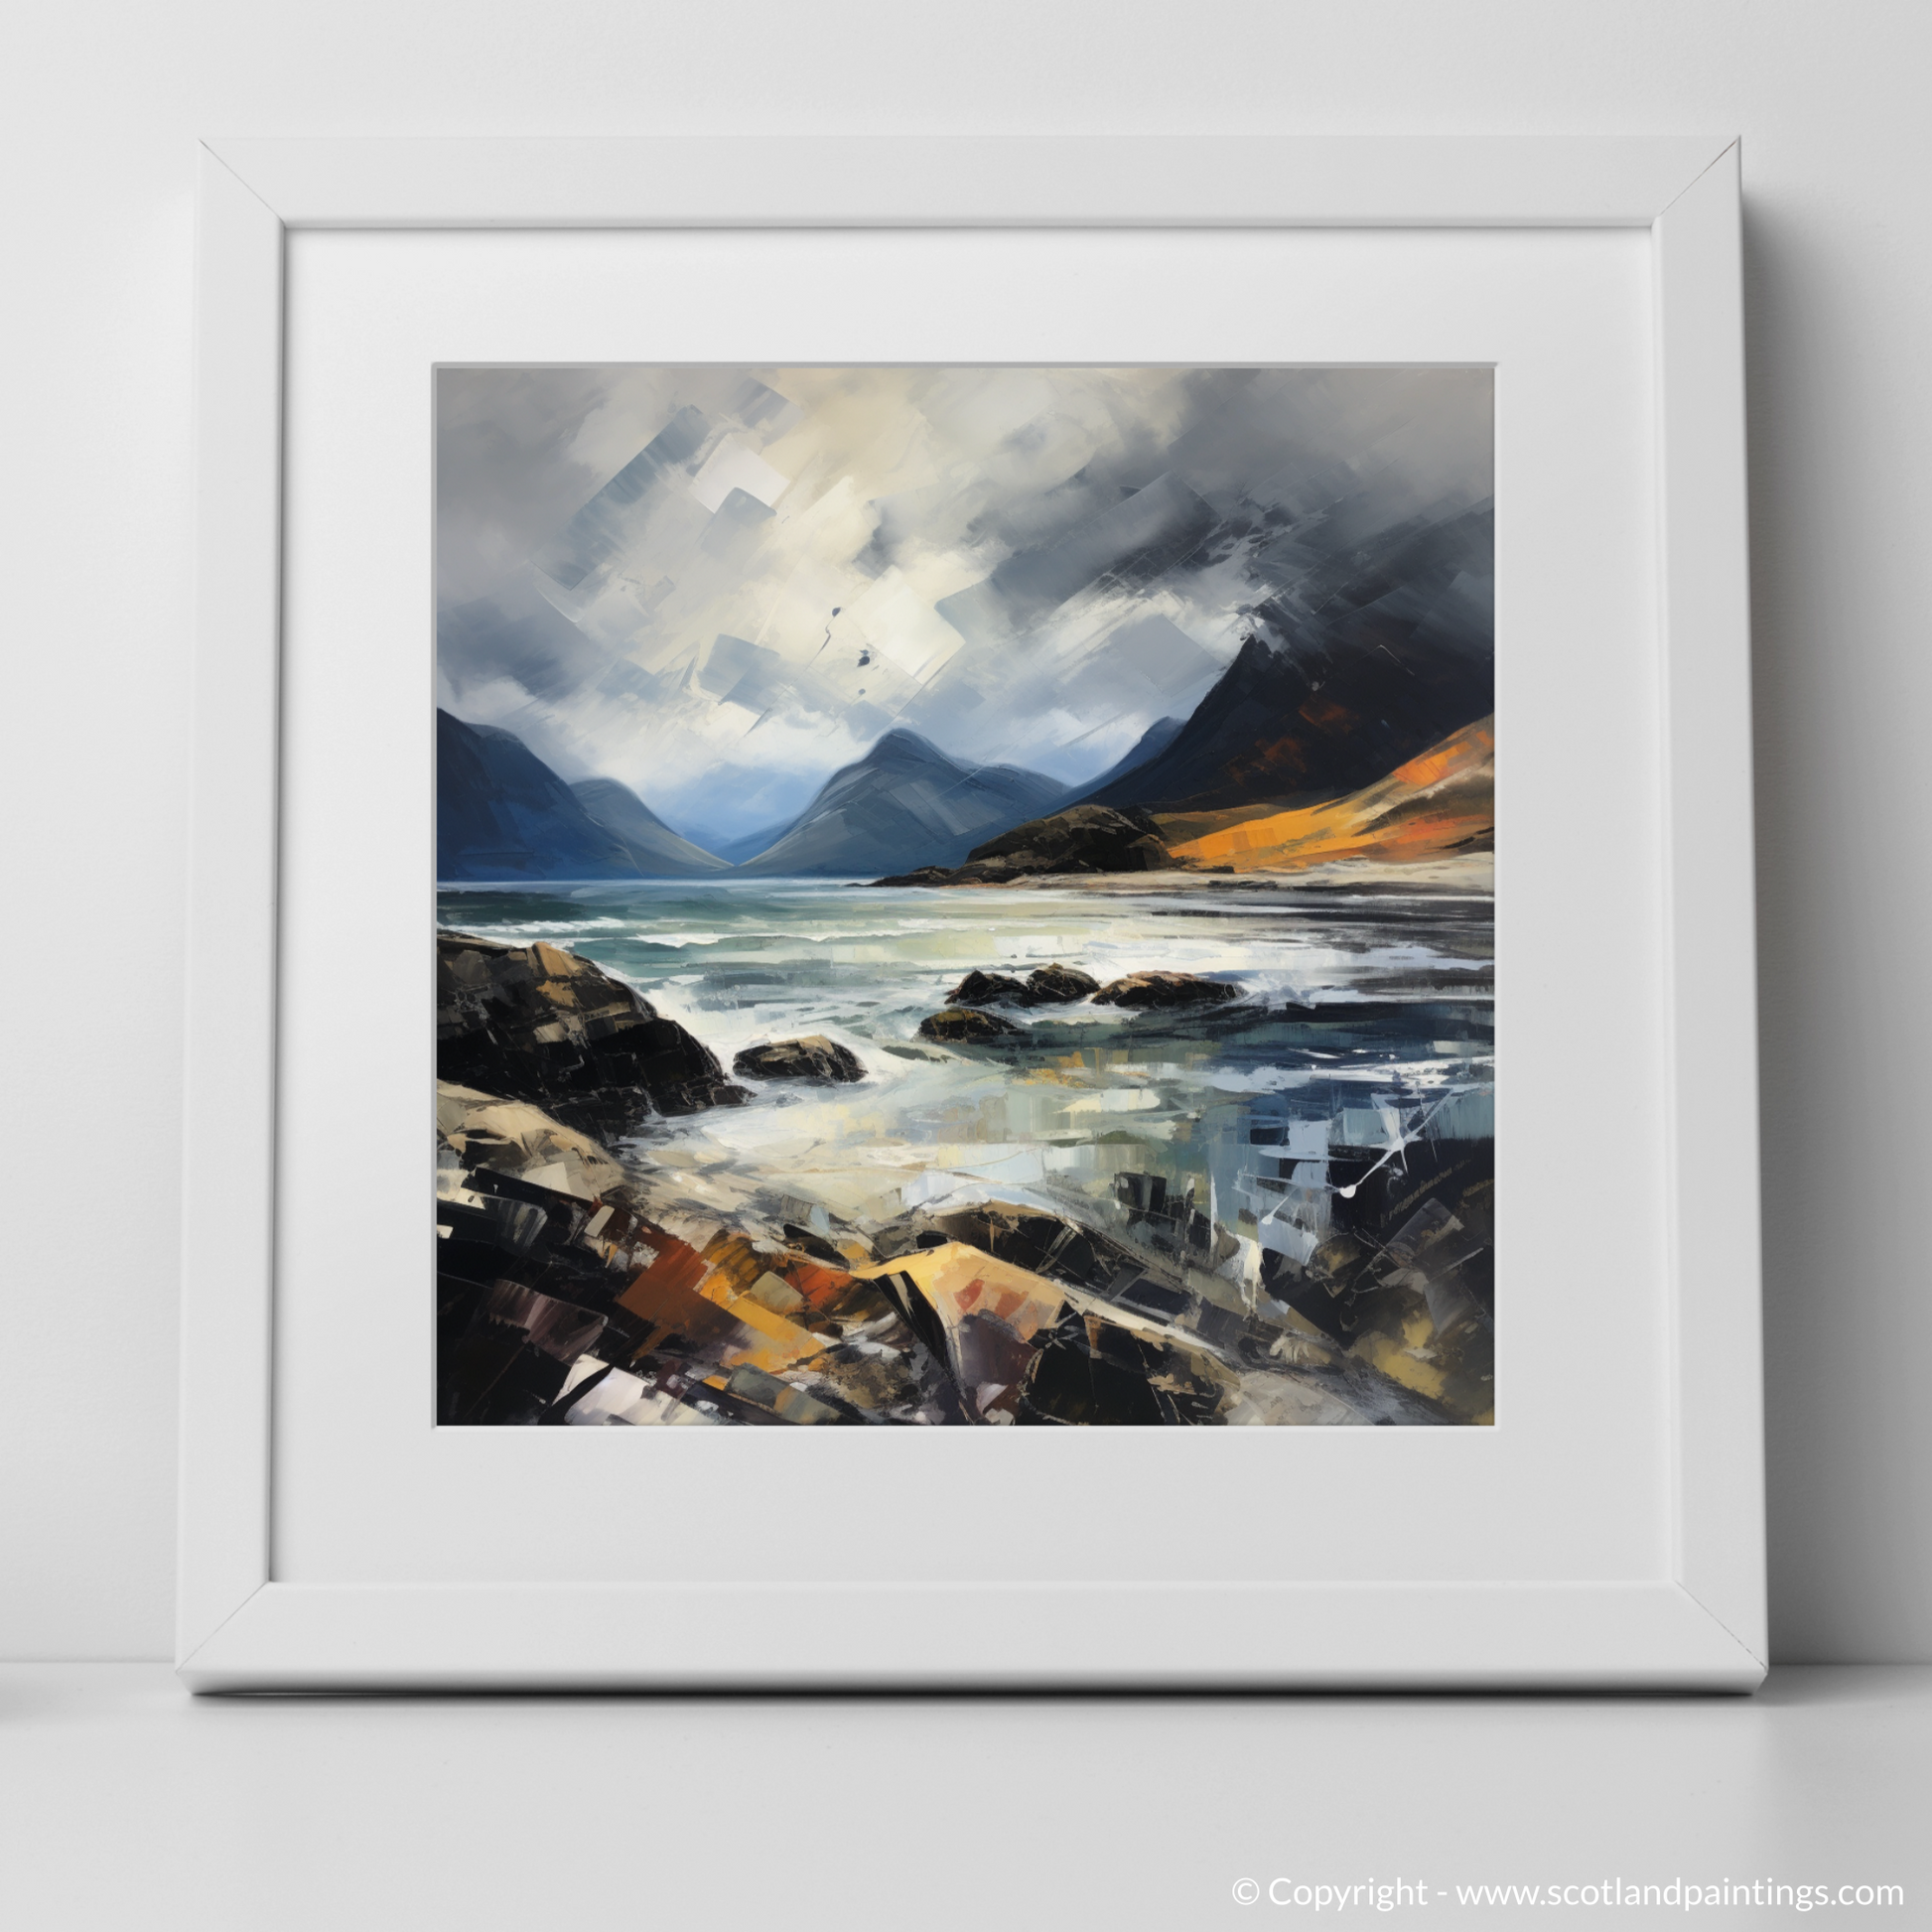 Art Print of Elgol Bay with a stormy sky with a white frame